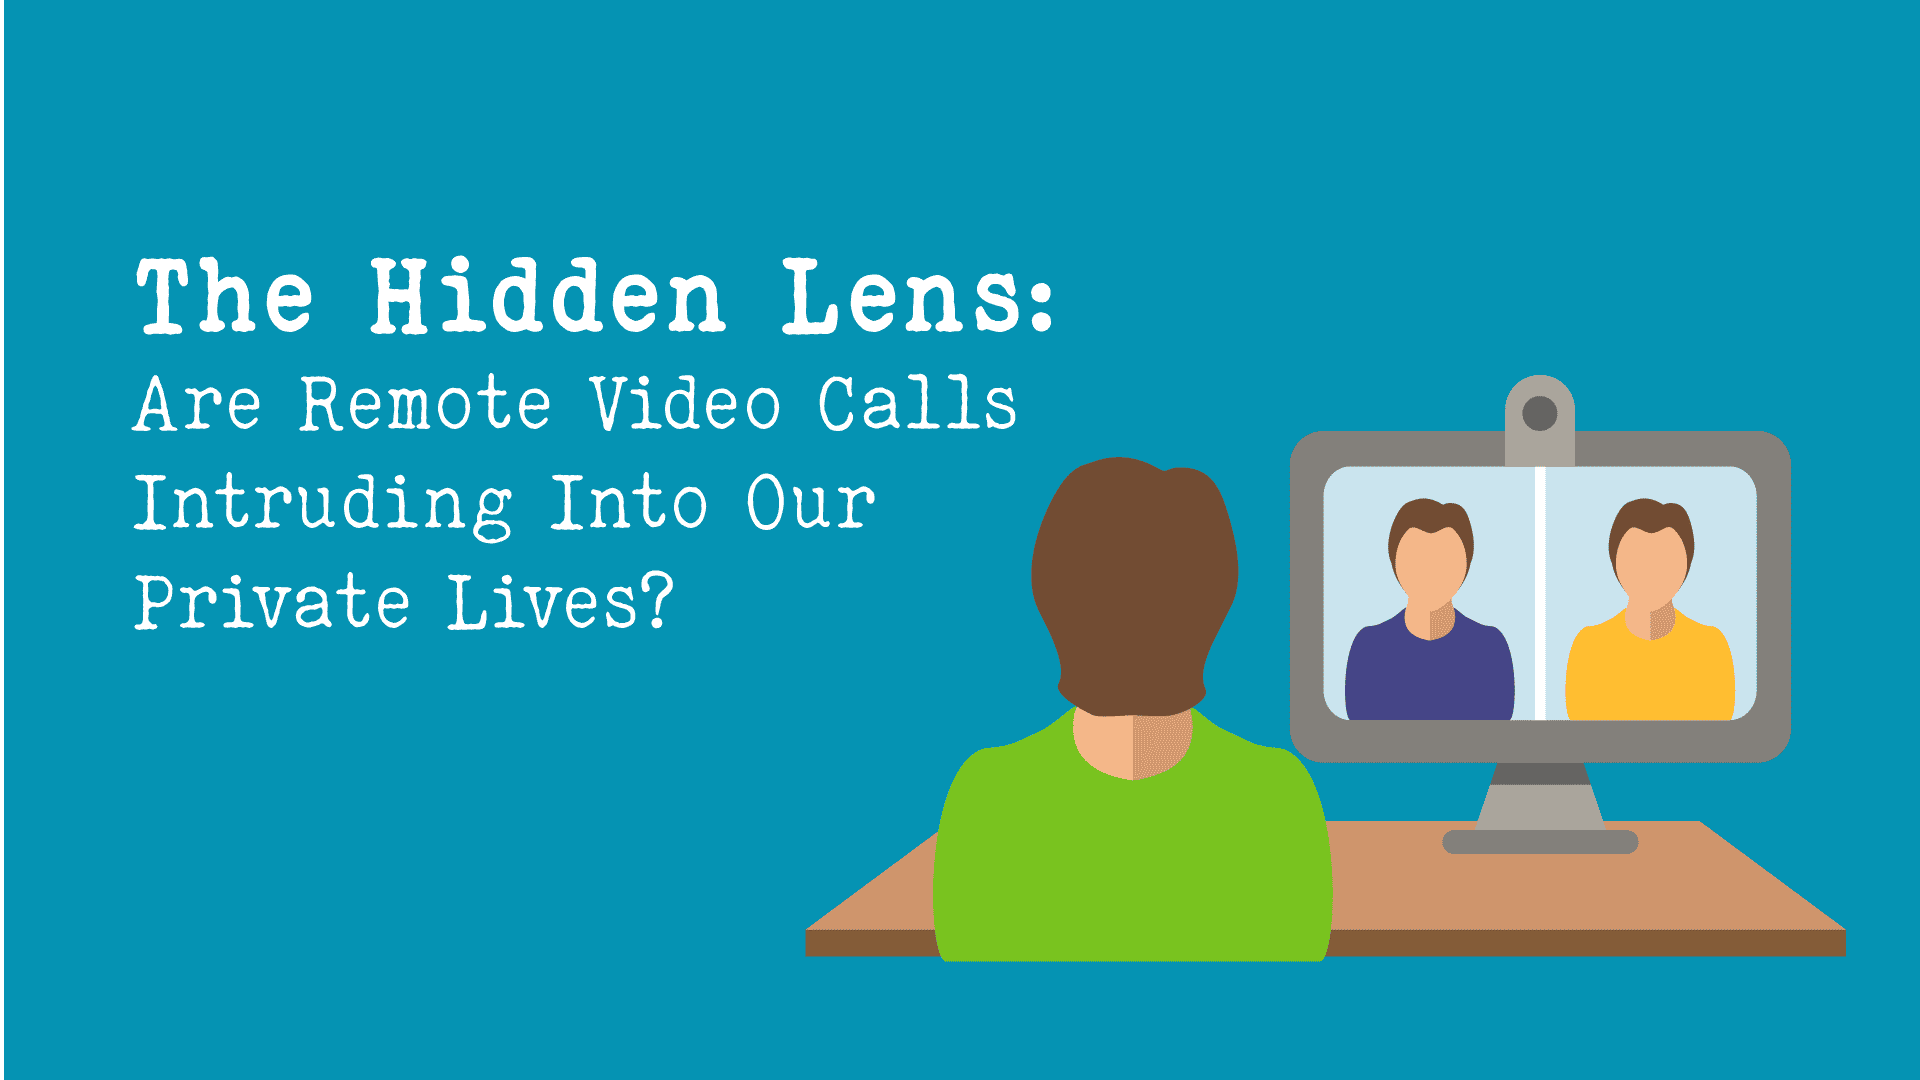 How Remote Video Calls Intruding Into Our Private Lives